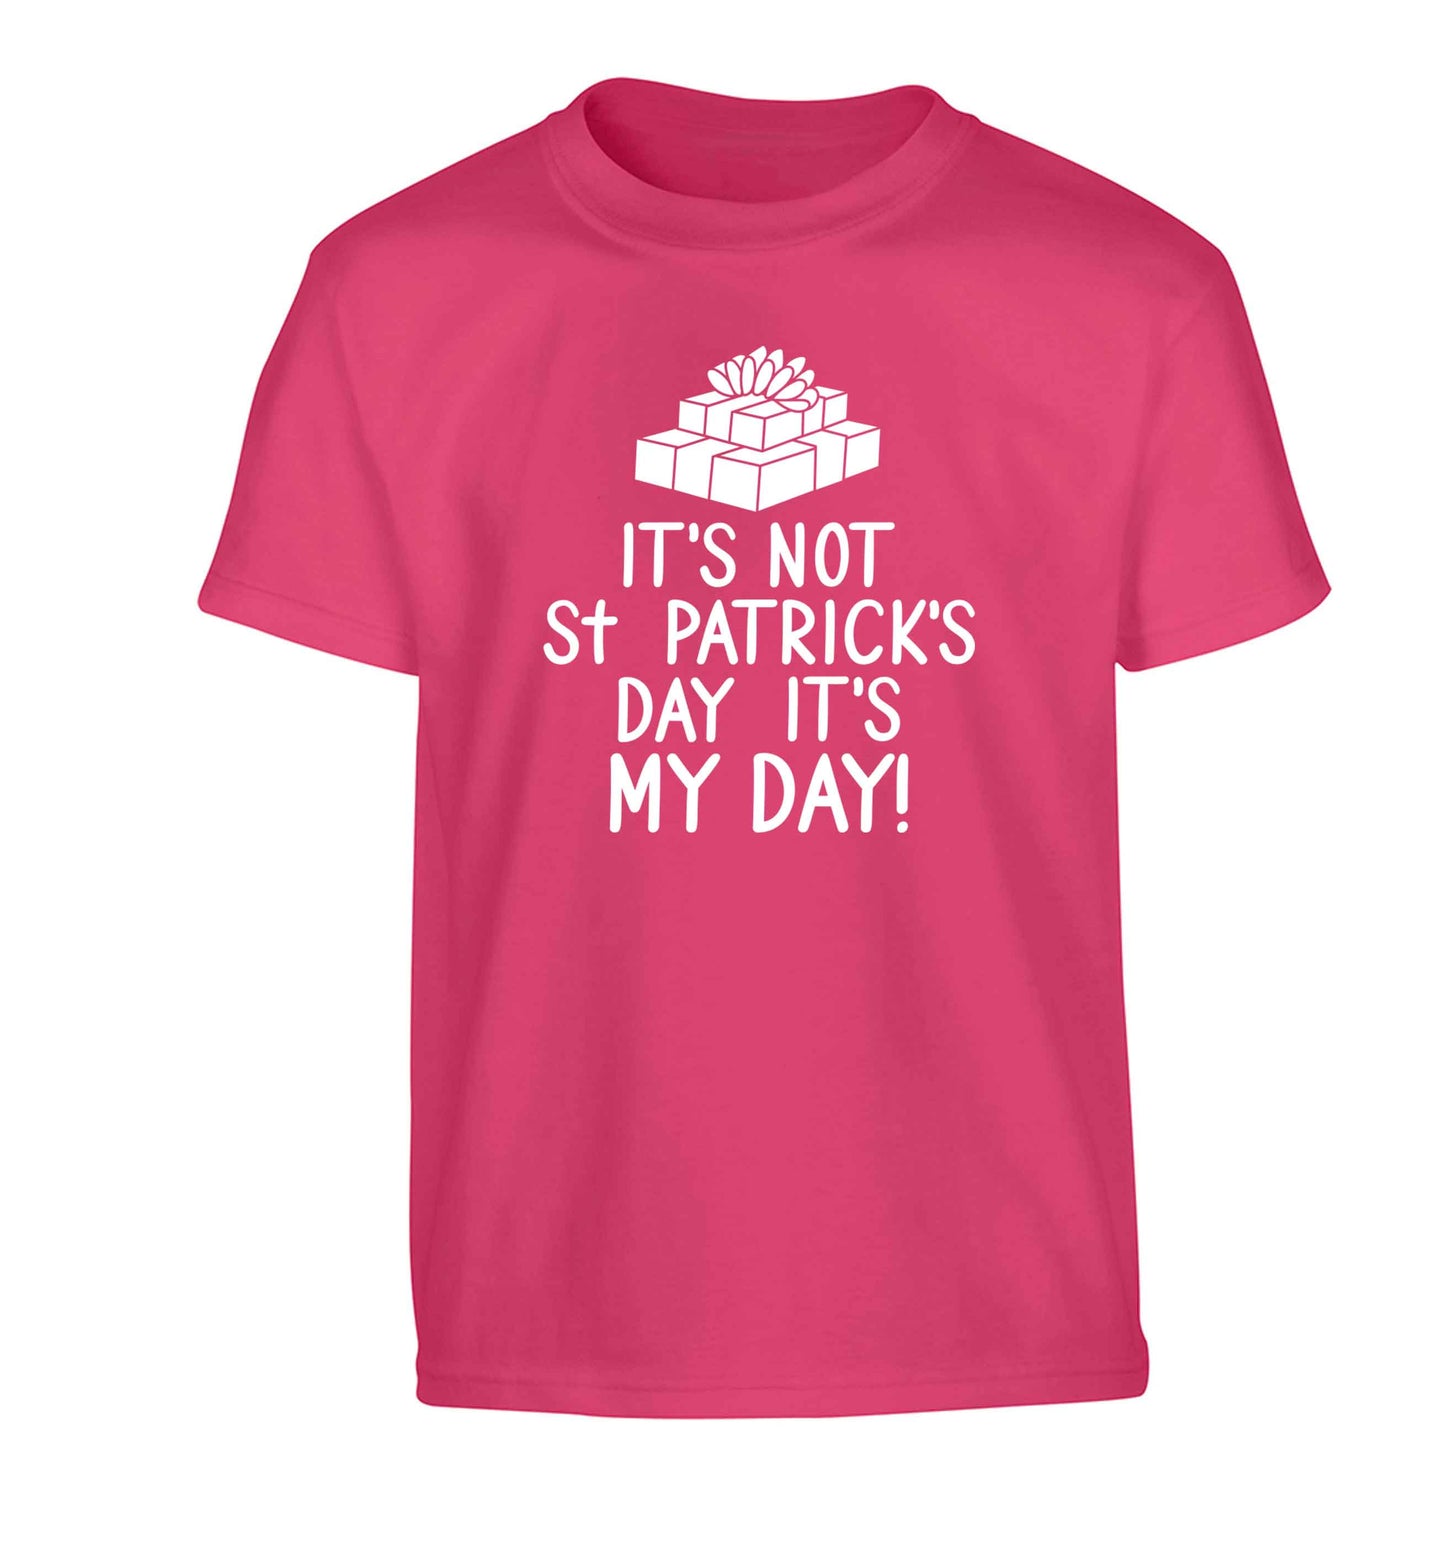 Funny gifts for your mum on mother's dayor her birthday! It's not St Patricks day it's my day Children's pink Tshirt 12-13 Years